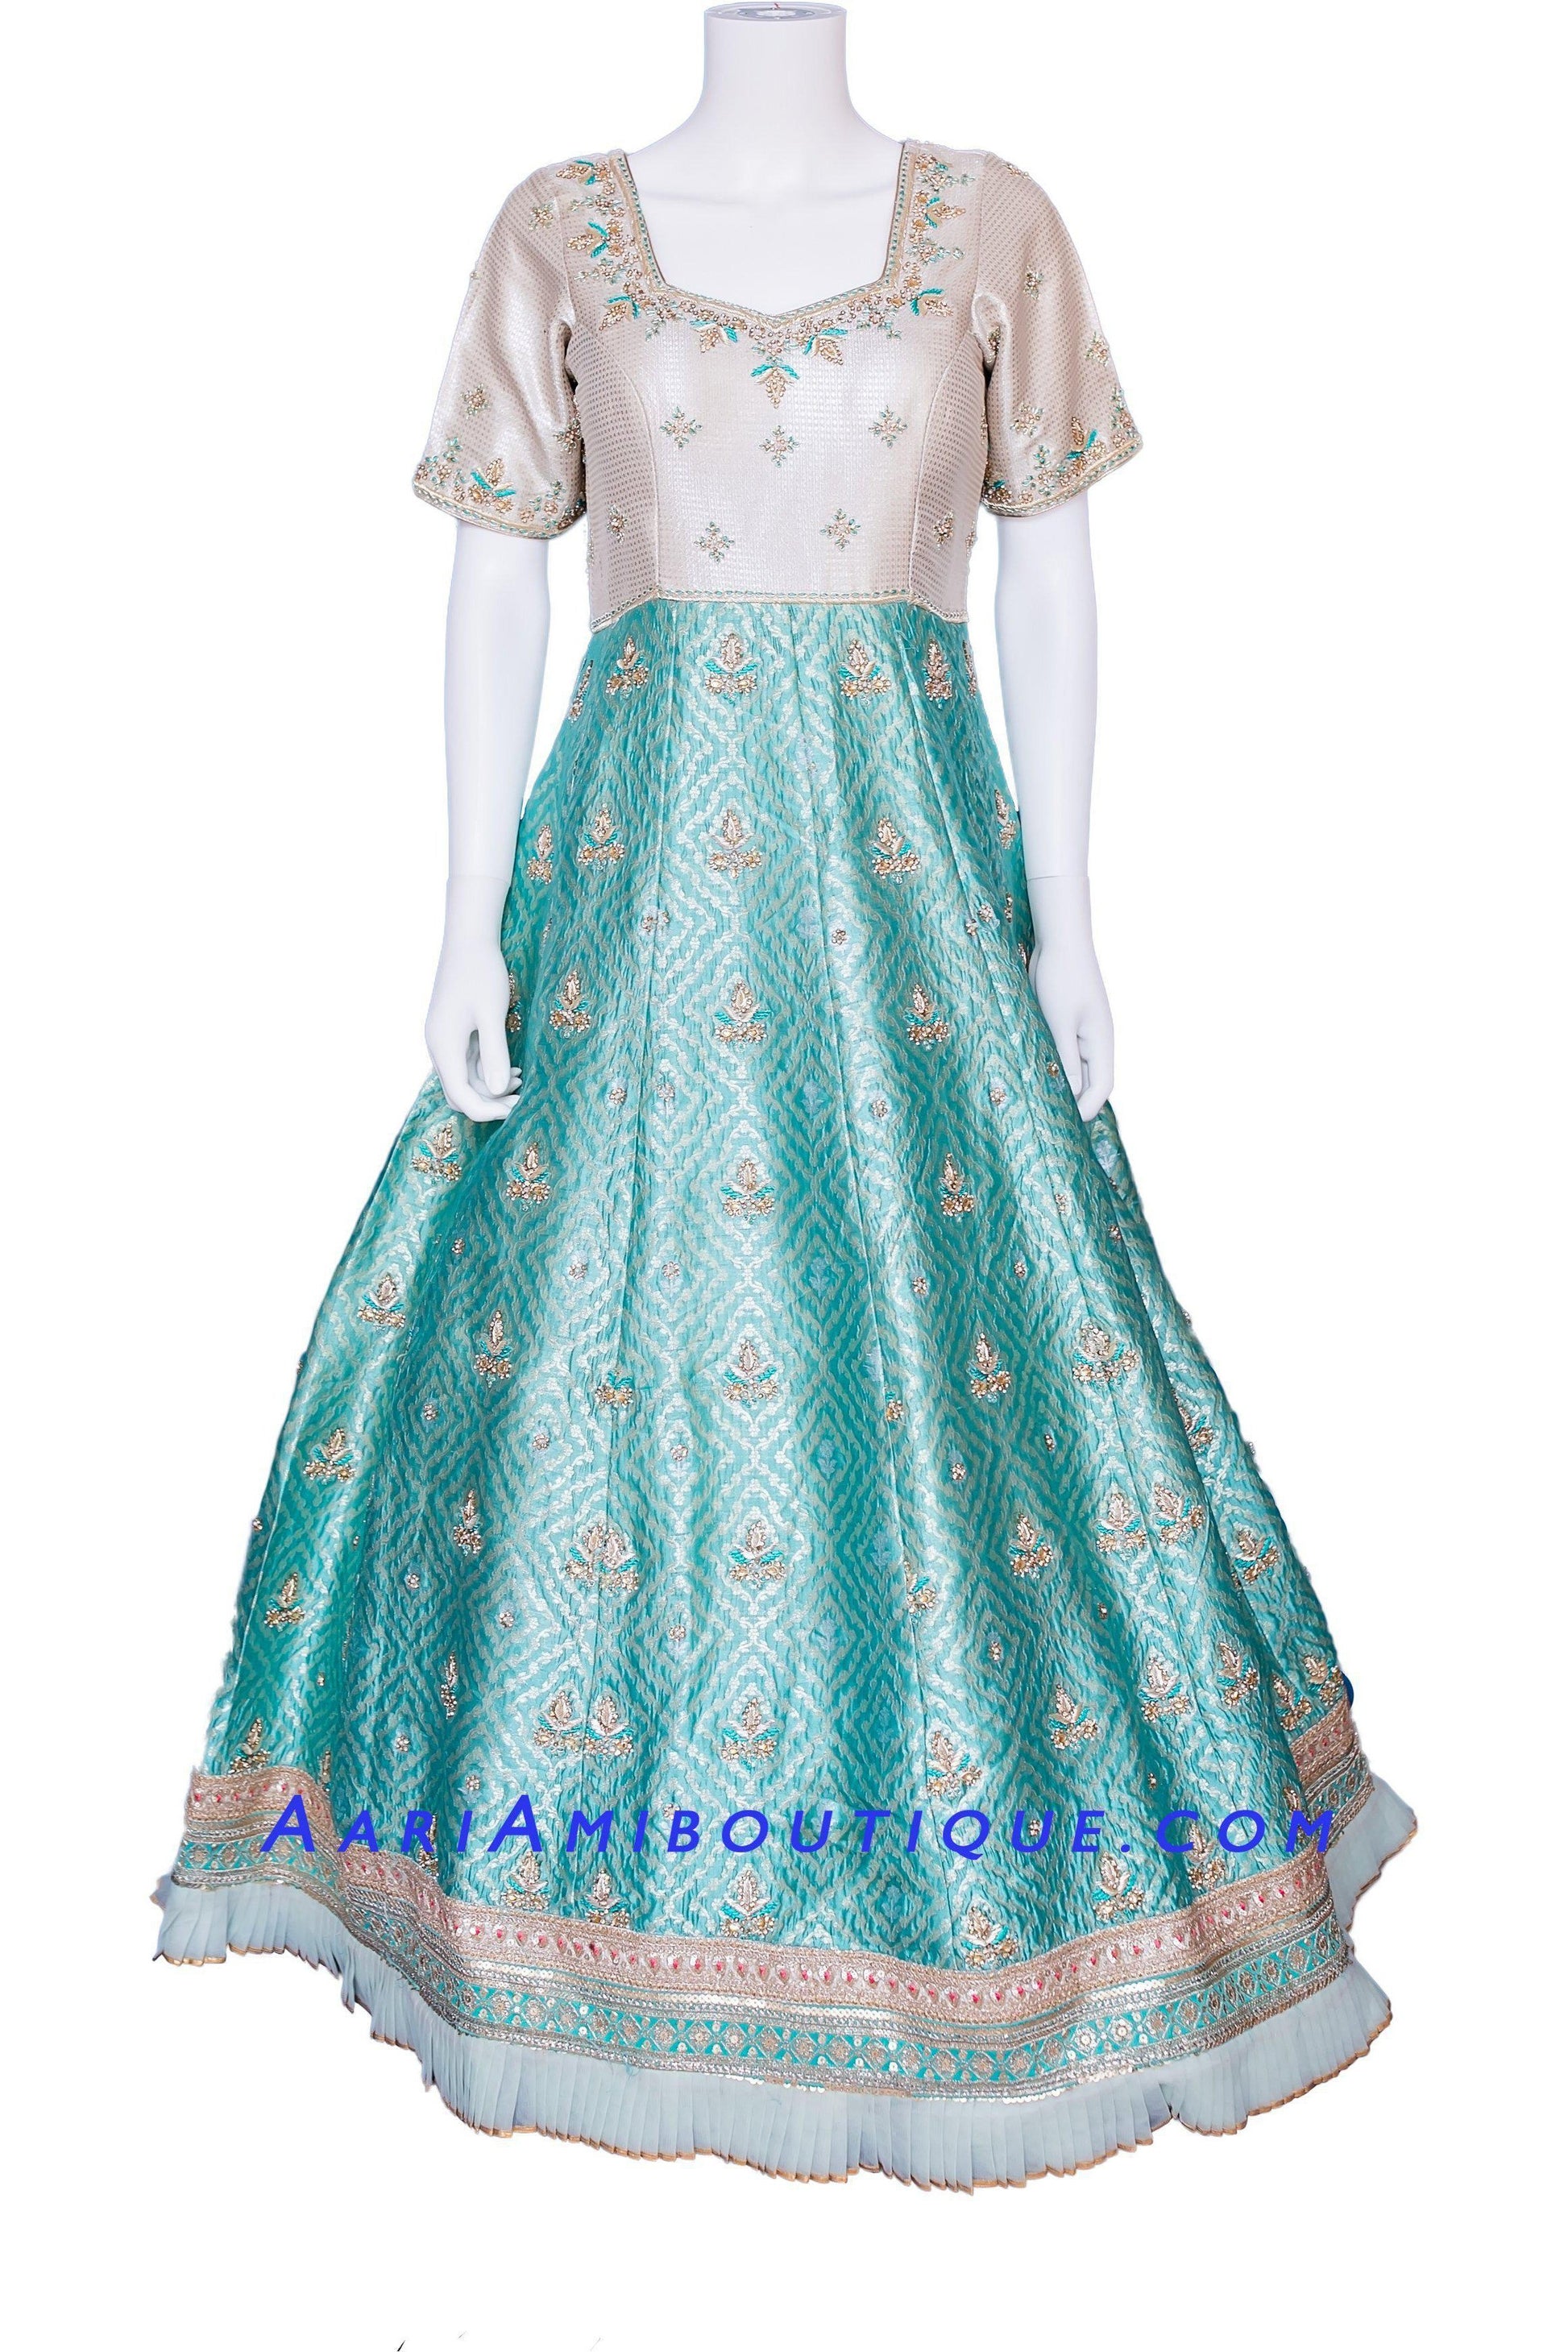 Vibrant Turquoise and Gold Brocade Silk Anarkali Set-AariAmi Boutique